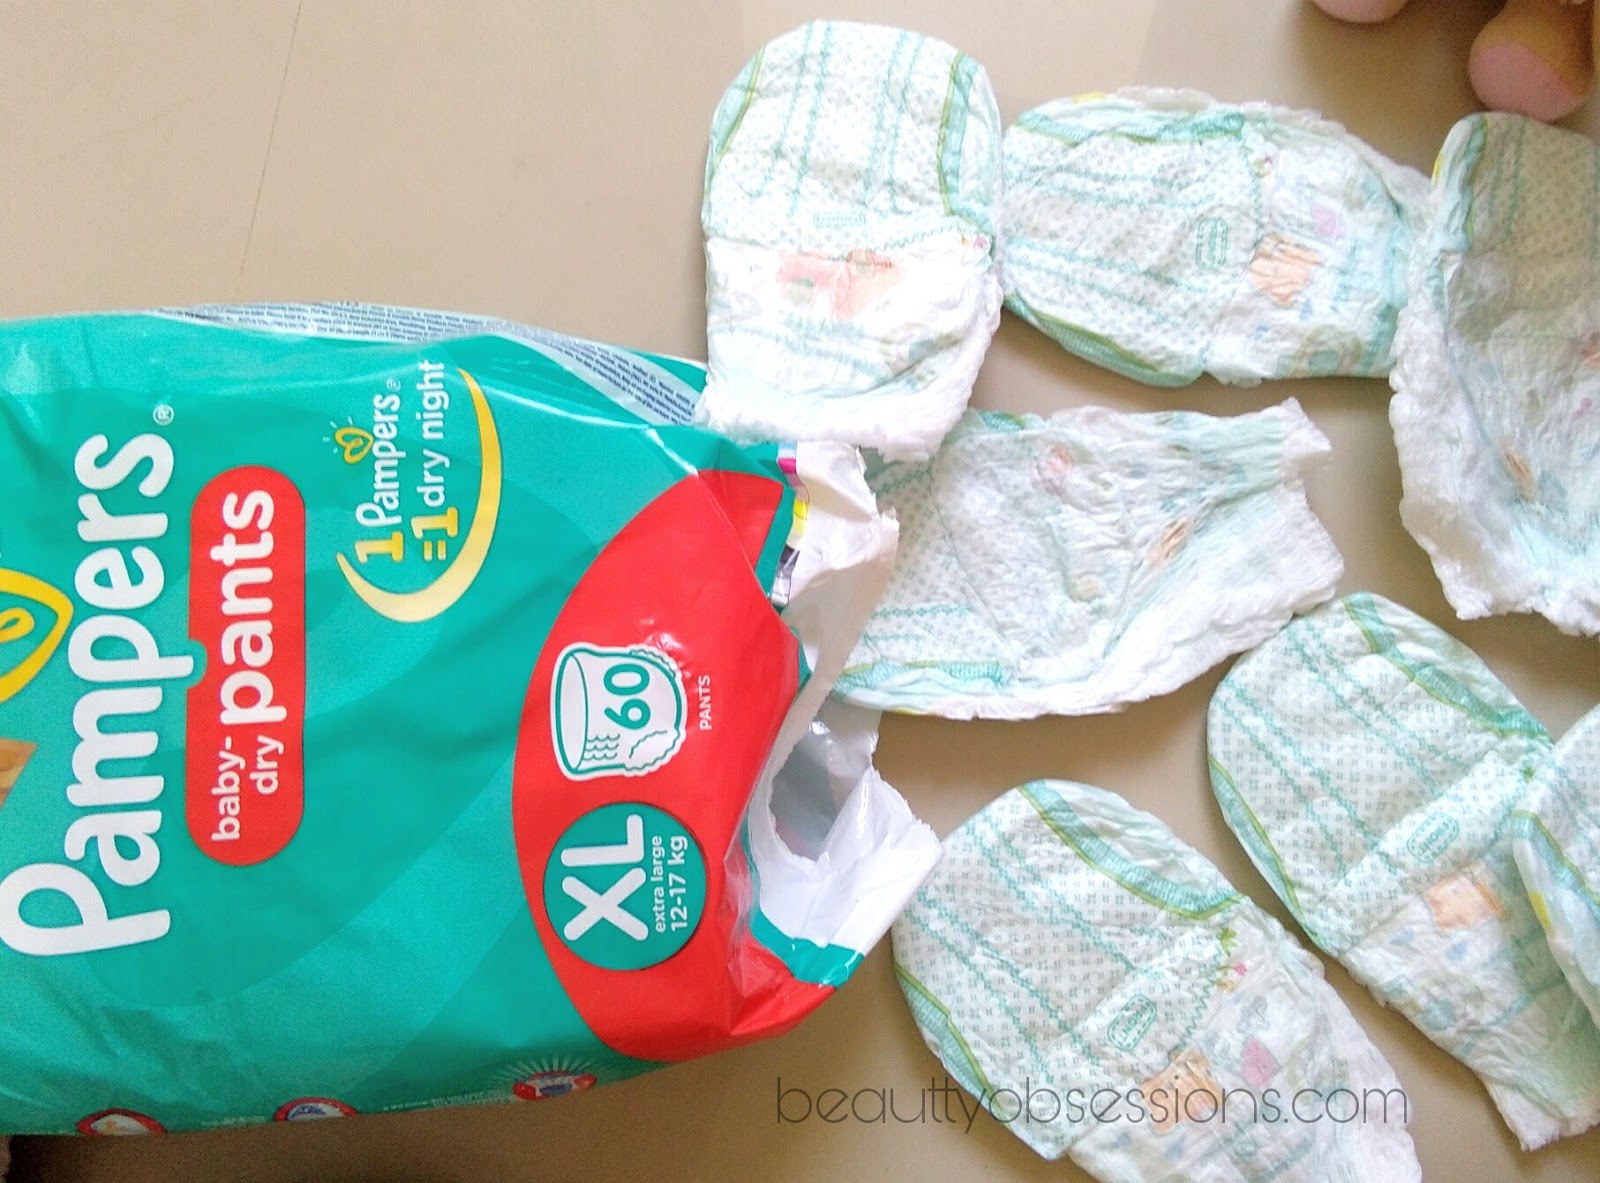 Buy HUGGIES DRY PANTS EXTRA LARGE SIZE DIAPERS 5 COUNT Online  Get Upto  60 OFF at PharmEasy